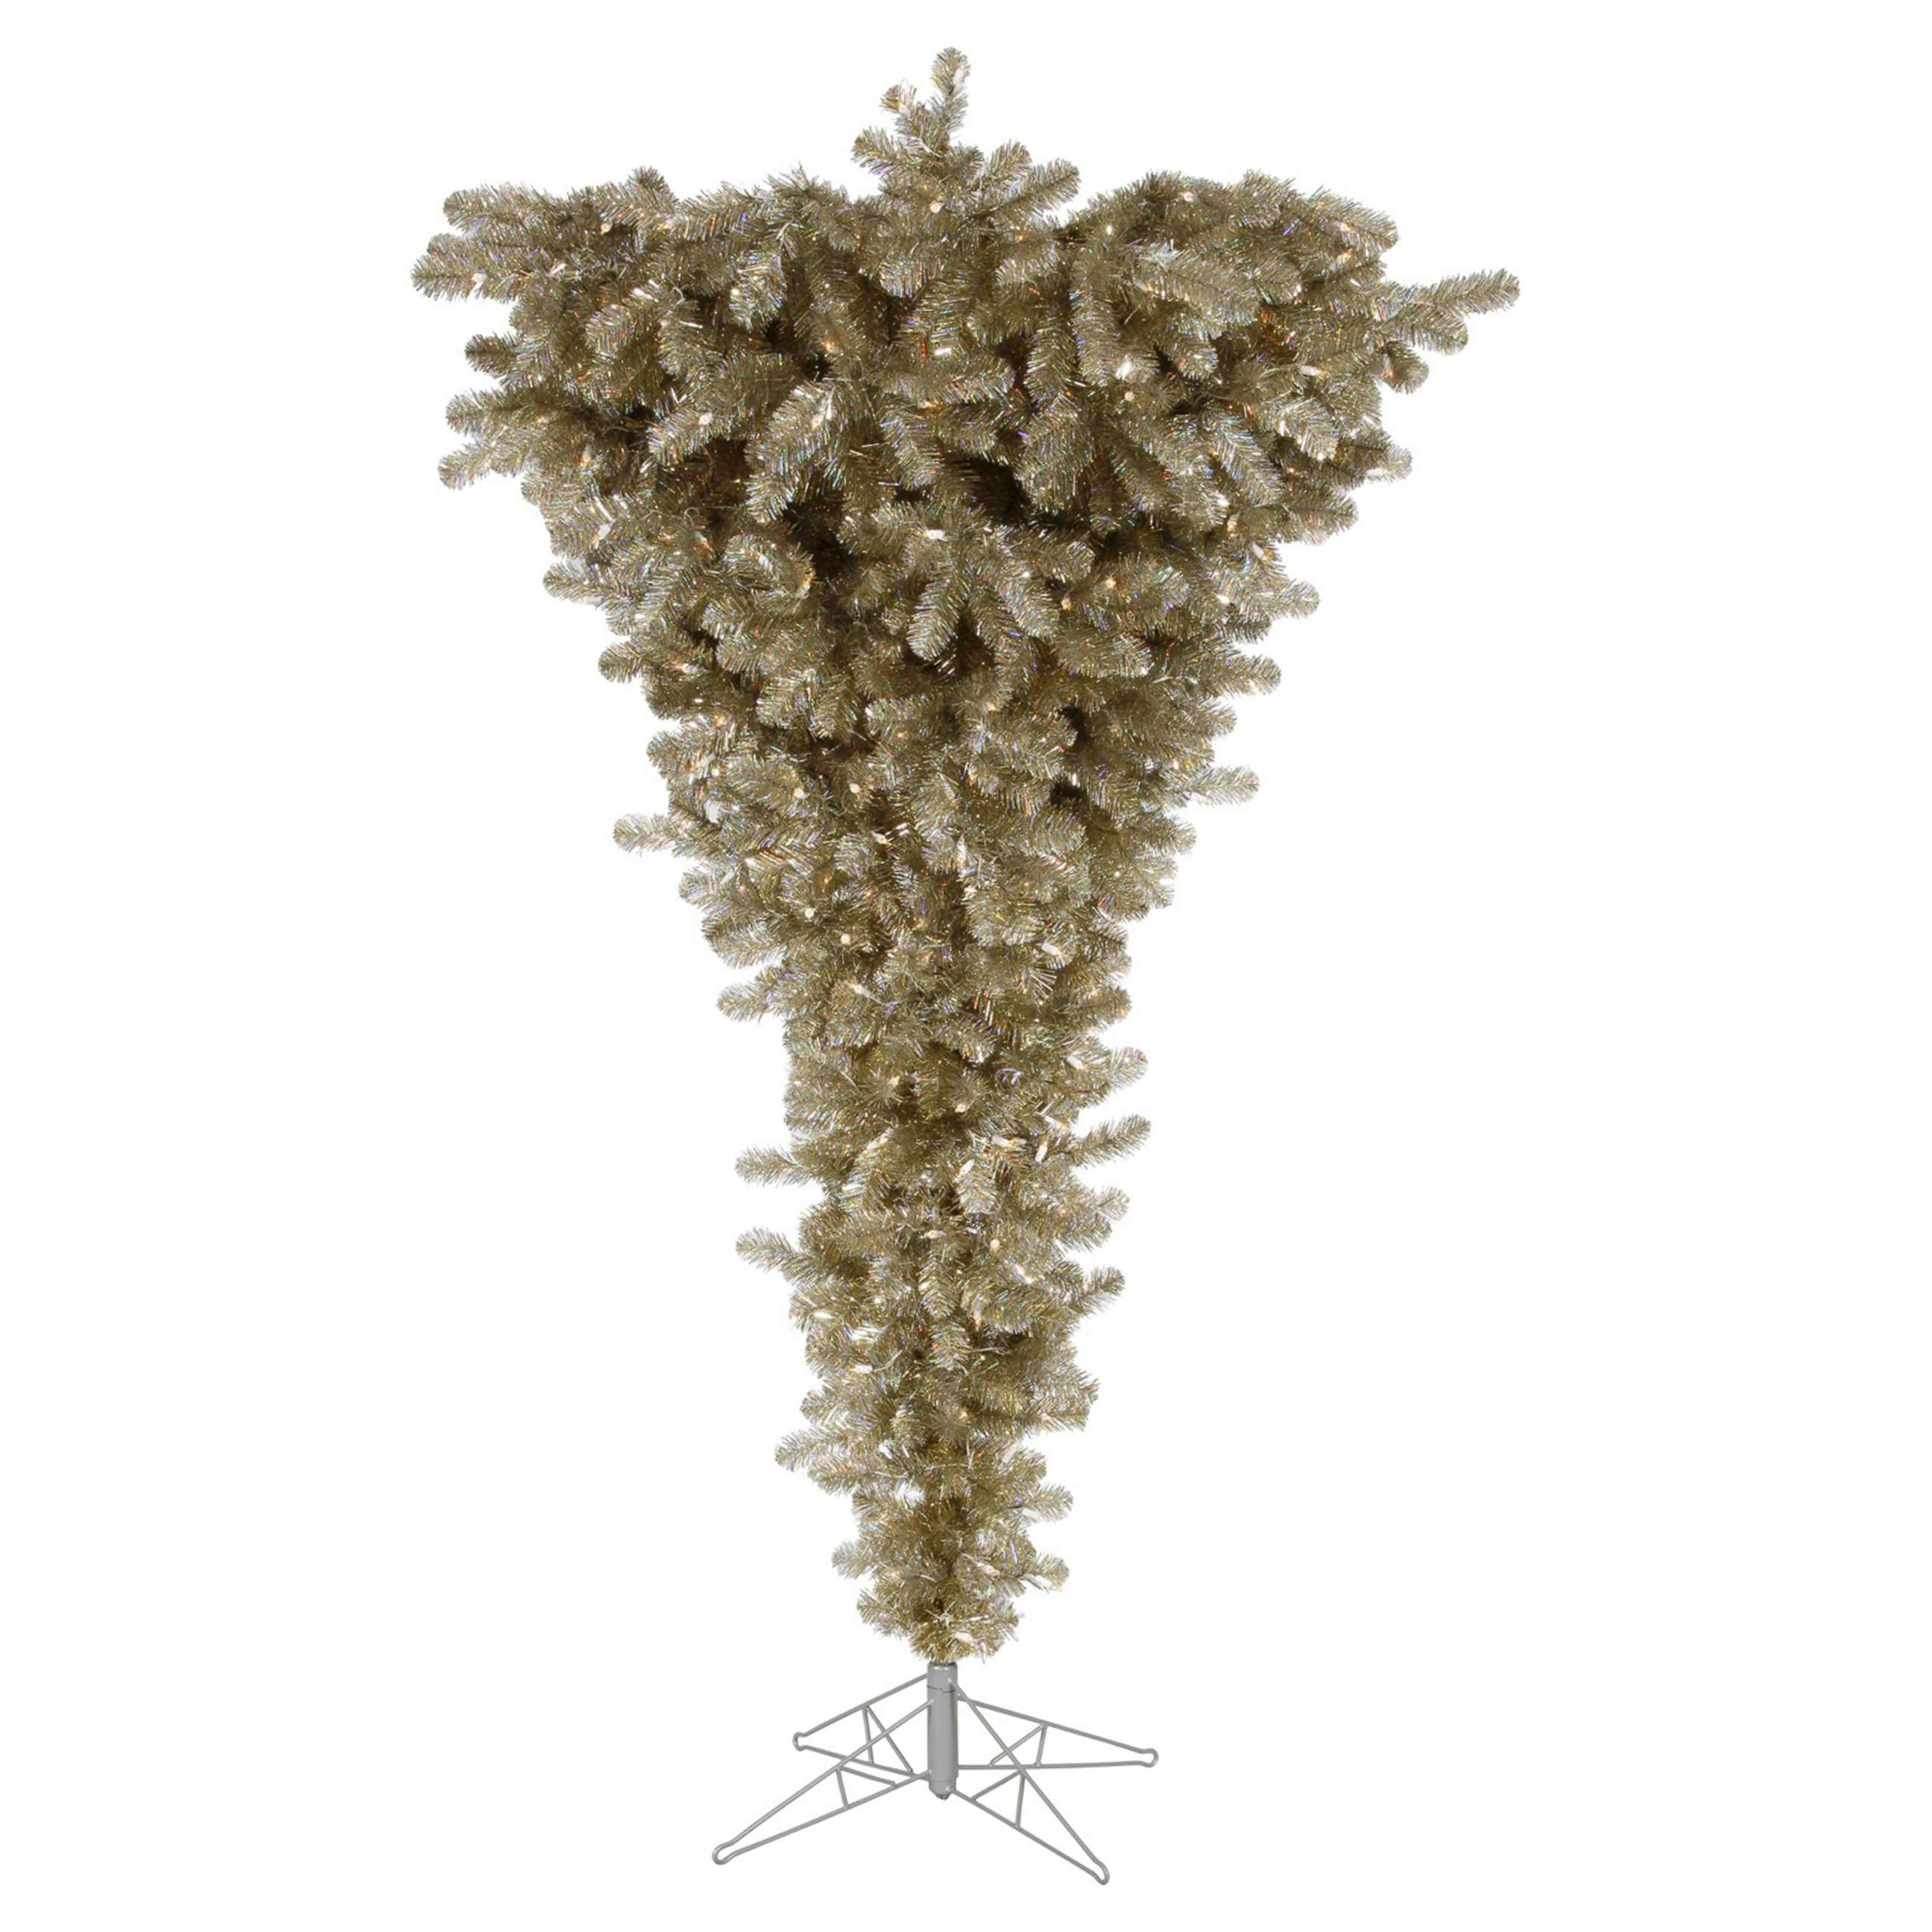 PHOTO: A 7.5-foot pre-lit champagne colored Christmas tree sold at Target.